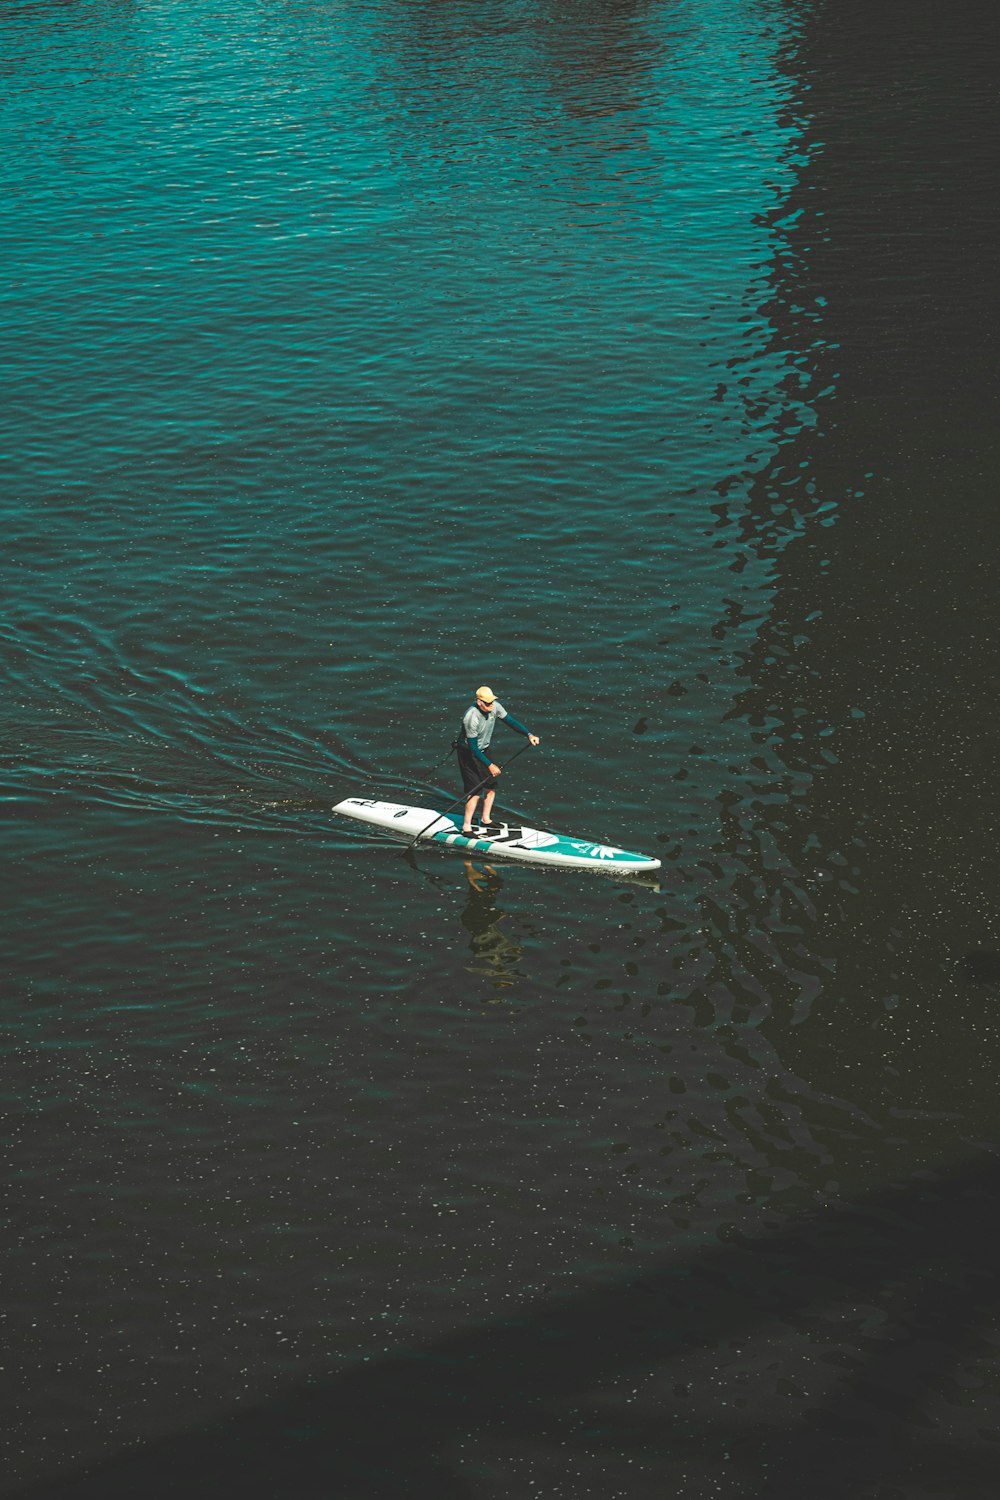 man in black wet suit riding white surfboard on body of water during daytime